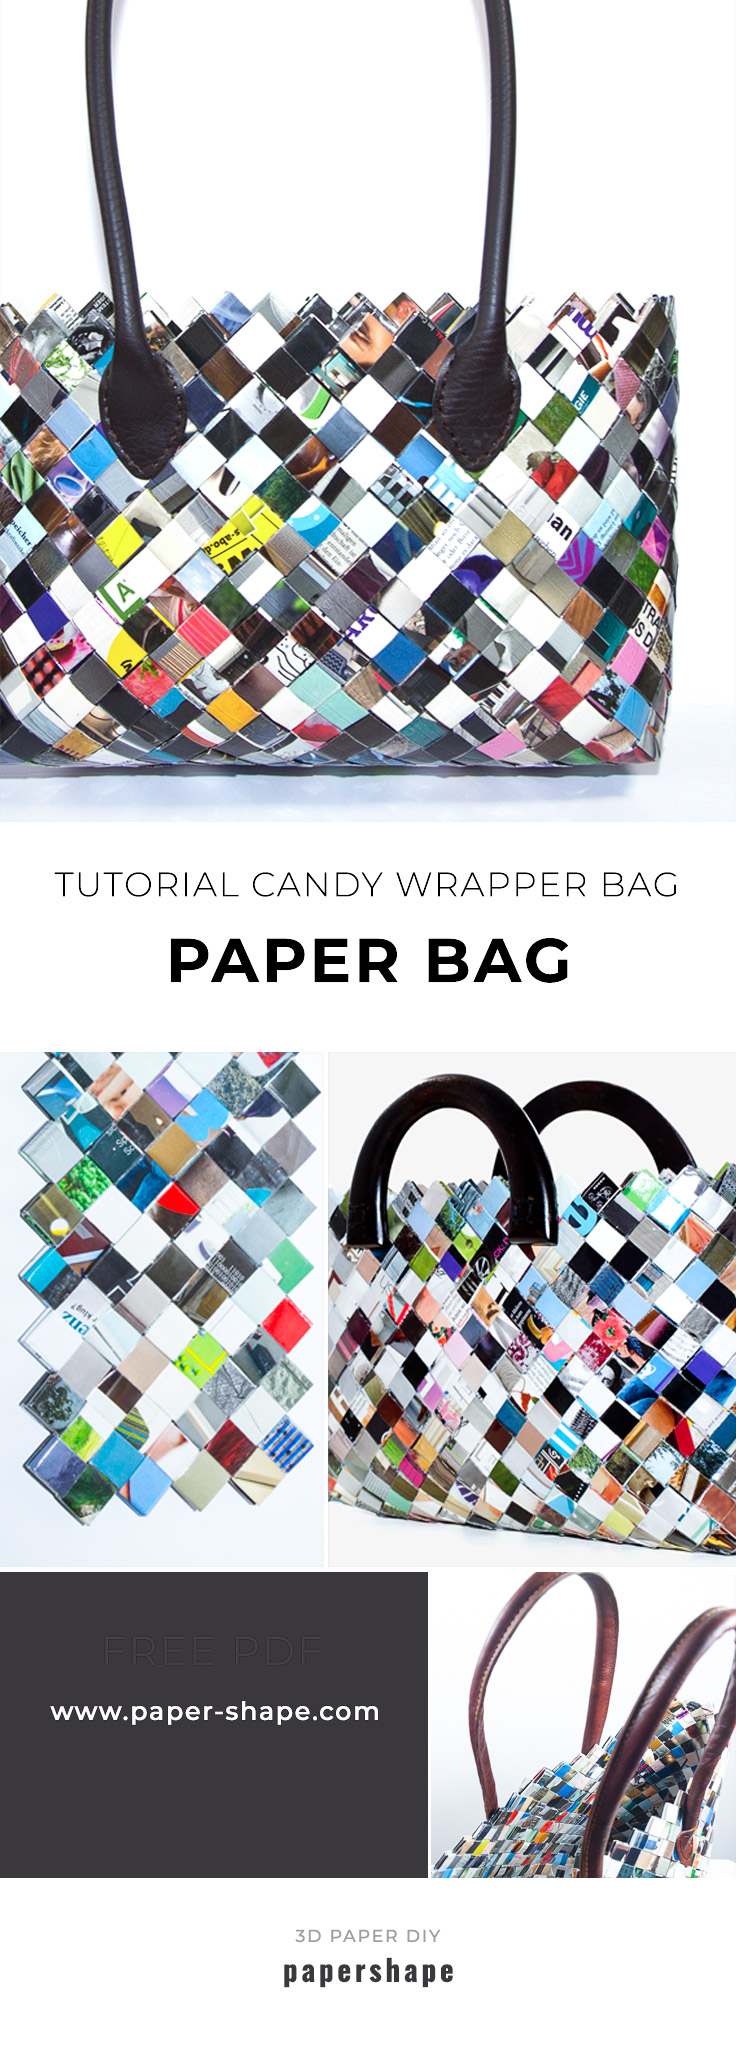 DIY Large Candy Wrapper Purse Instruction Guide PDF Download Tutorial to  Make Novelty Purses Using Recycled Wrappers That YOU Collect - Etsy |  Handtasche nähen, Taschen nähen, Taschen selber nähen